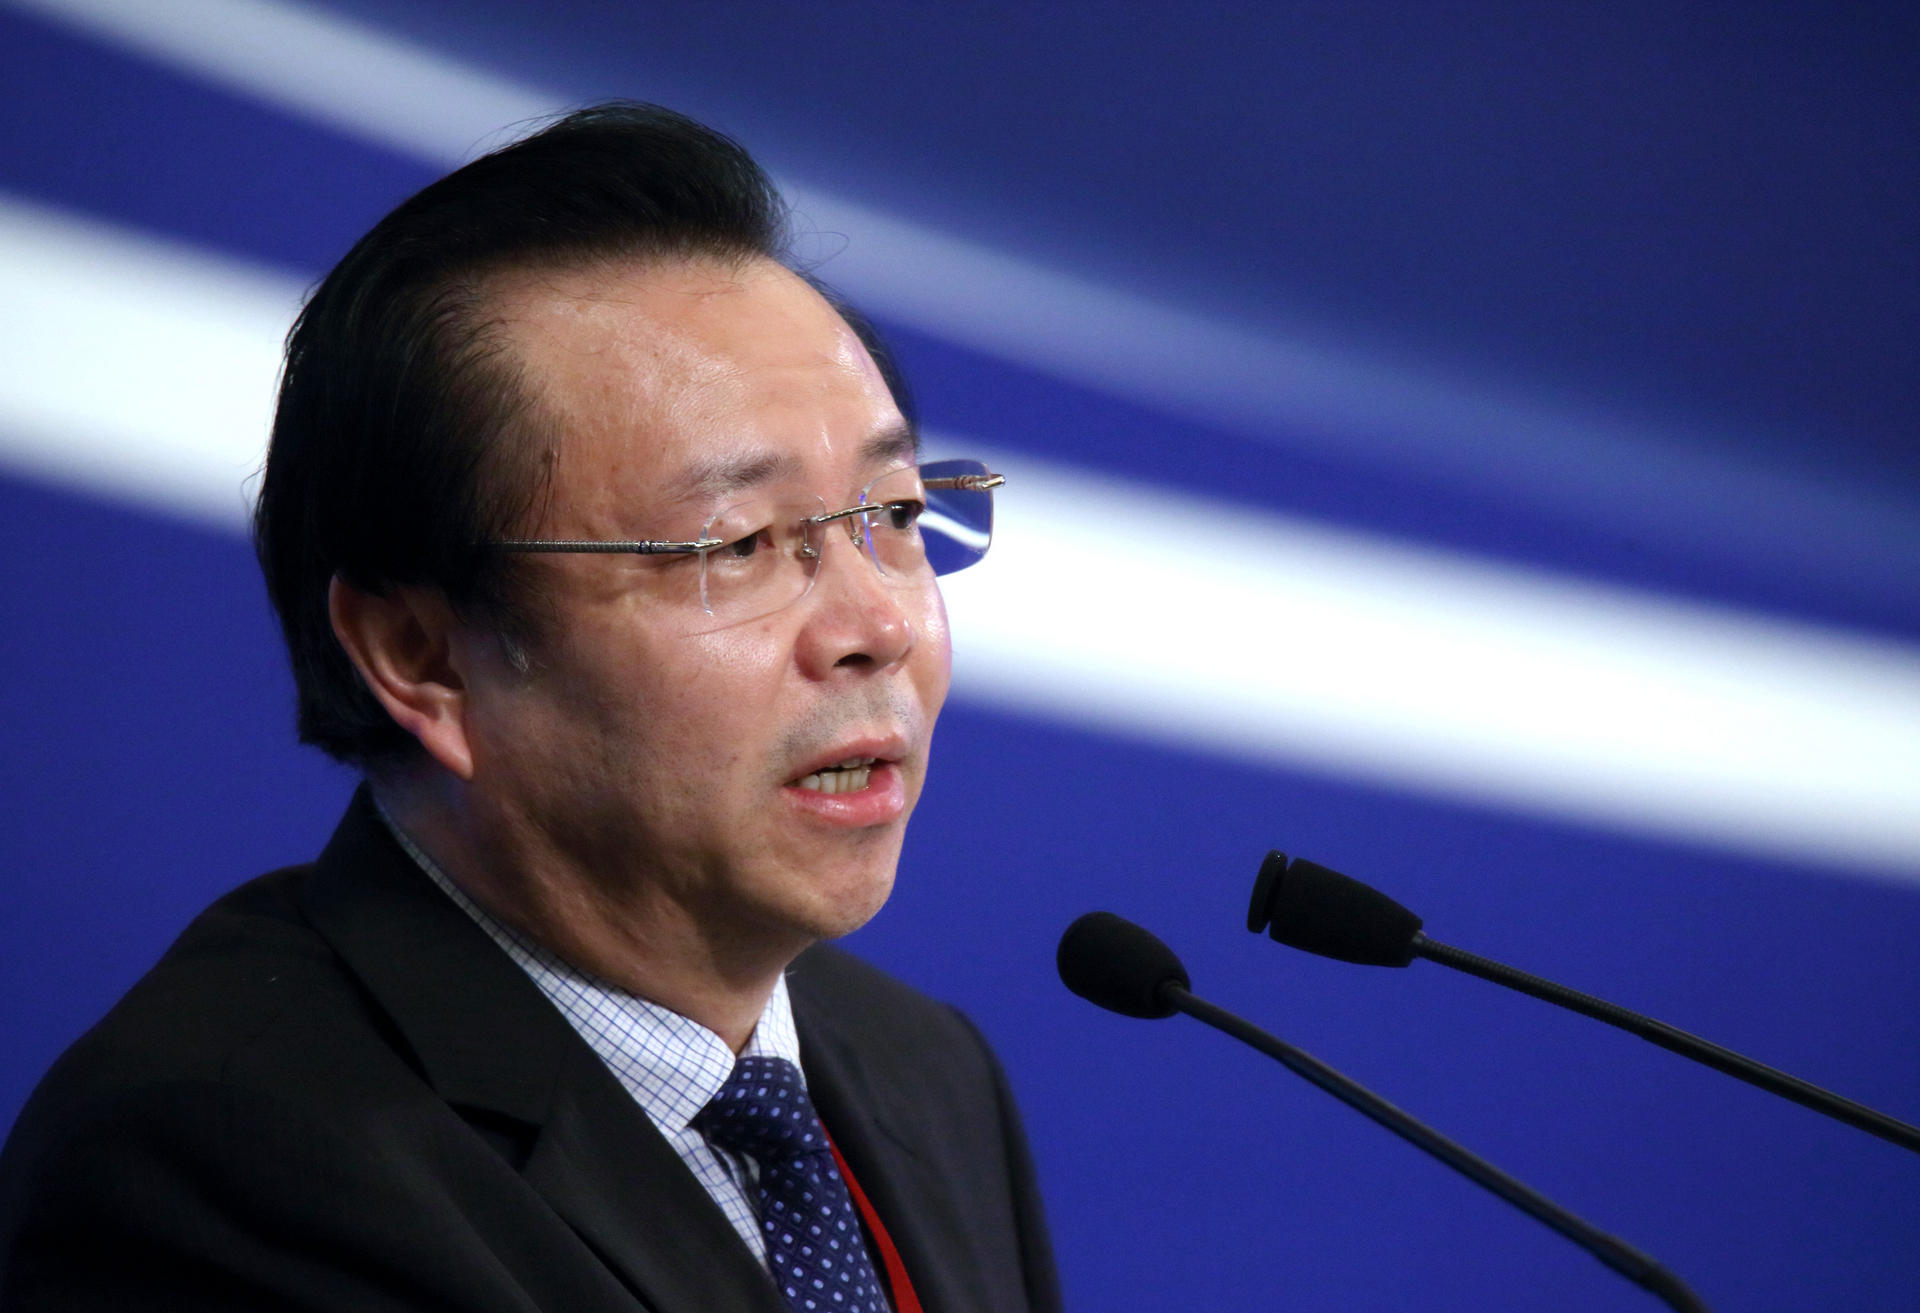 Huarong Asset Management chairman Lai Xiaomin says banks' non-performing loans have "risen significantly". Photo: Bloomberg